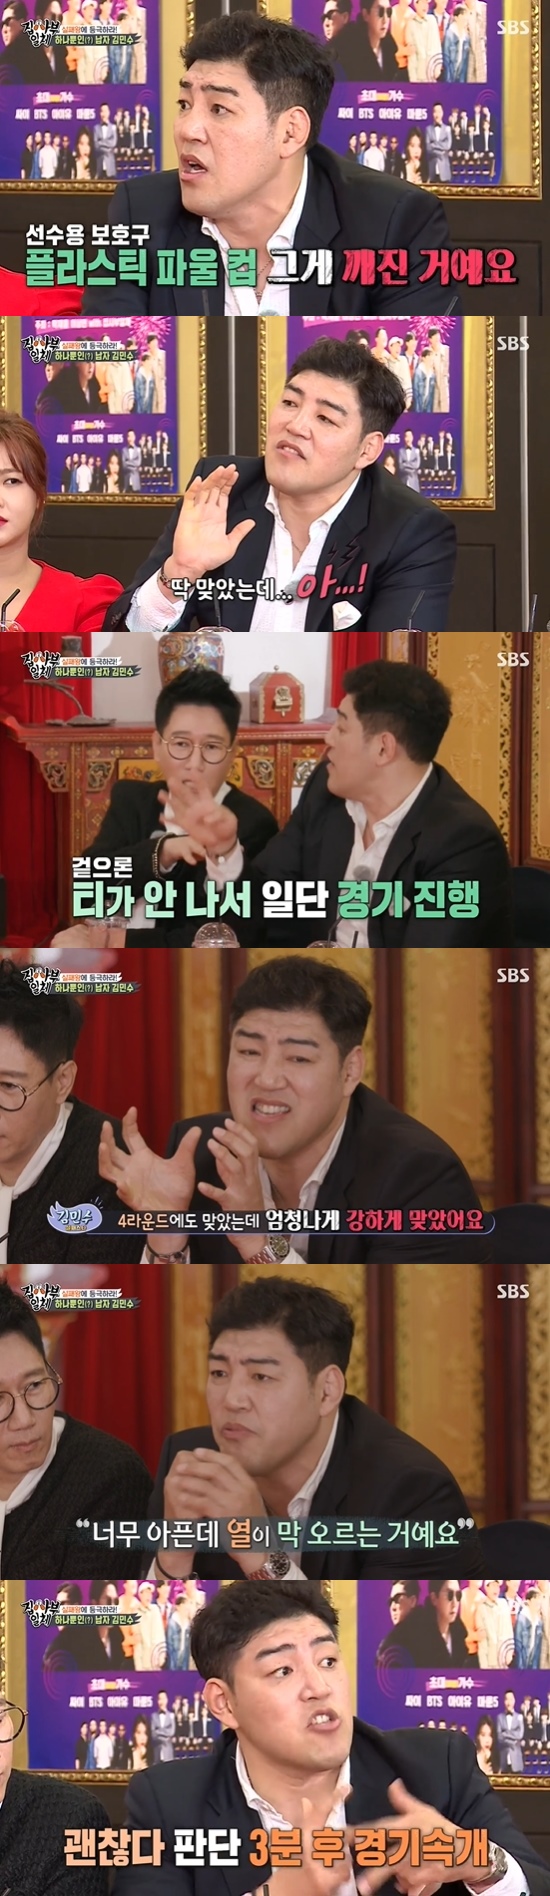 All The Butlers Kim Min-soo has been crowned FailureKingOn the 28th SBS All The Butlers, a Failure Festival was started to select FailureKing.Kim Min-soo said, I do not have one side about Failure.Failure Festival participants who did not know Kim Min-soos story asked, What is there? Kim Min-soo surprised the participants by saying, There is no testicle one side.It was an accident that occurred while Kim Min-soo was playing against Murad Bowsidi; Kim Min-soo said: I was hit by a player, and the plastic foul cup, a players reserve, was broken.I was protecting a male emergency. But I did not know. Ji Suk-jin urged me to talk quickly, saying, Do you know what? How did you get hit? Kim Min-soo said: I was hit very strongly in the fourth round, and then I was so sick and I got a fever.The doctor checked and said it was okay, and three minutes later Kyonggi was back. Kim Dong-hyun said, K-1 Kyonggi is also famous for overworking the body, which is 3 Kyonggi if it is many a day.It is great that we fought, and people themselves are different. Kim Min-soo finished Kyonggi even in that situation and won as much.Kim Min-soo said, I went to the ambulance and I got a lot of low kicks, so I had blood surgery because my blood was full.Lee Seung-gi said, It is great to win in that situation. Shin Sung-rok said, It is more great to overcome it and become a father of two children.Ji Suk-jin, who heard this, congratulated him, saying, I am fine, but I am one.The All The Butlers and Failurestar teams began to compete, a showdown with balloons all over the body and walking on the thornfield.When Jung Eun-woo appeared with a balloon, Solbi laughed, saying, Its like a fashion show.Next came Kim Min-soo of the Failure Star team, who beat Jung Eun-woo to win.Round two was a frog in the well; this time it was a victory for the All The Butlers team; Ji Suk-jin encouraged Failure stars, saying, Do we lose once or twice?I feel sober because I admit Failure, I feel sober, said Ji Suk-jin, who was voted FailureKing.Photo = SBS Broadcasting Screen